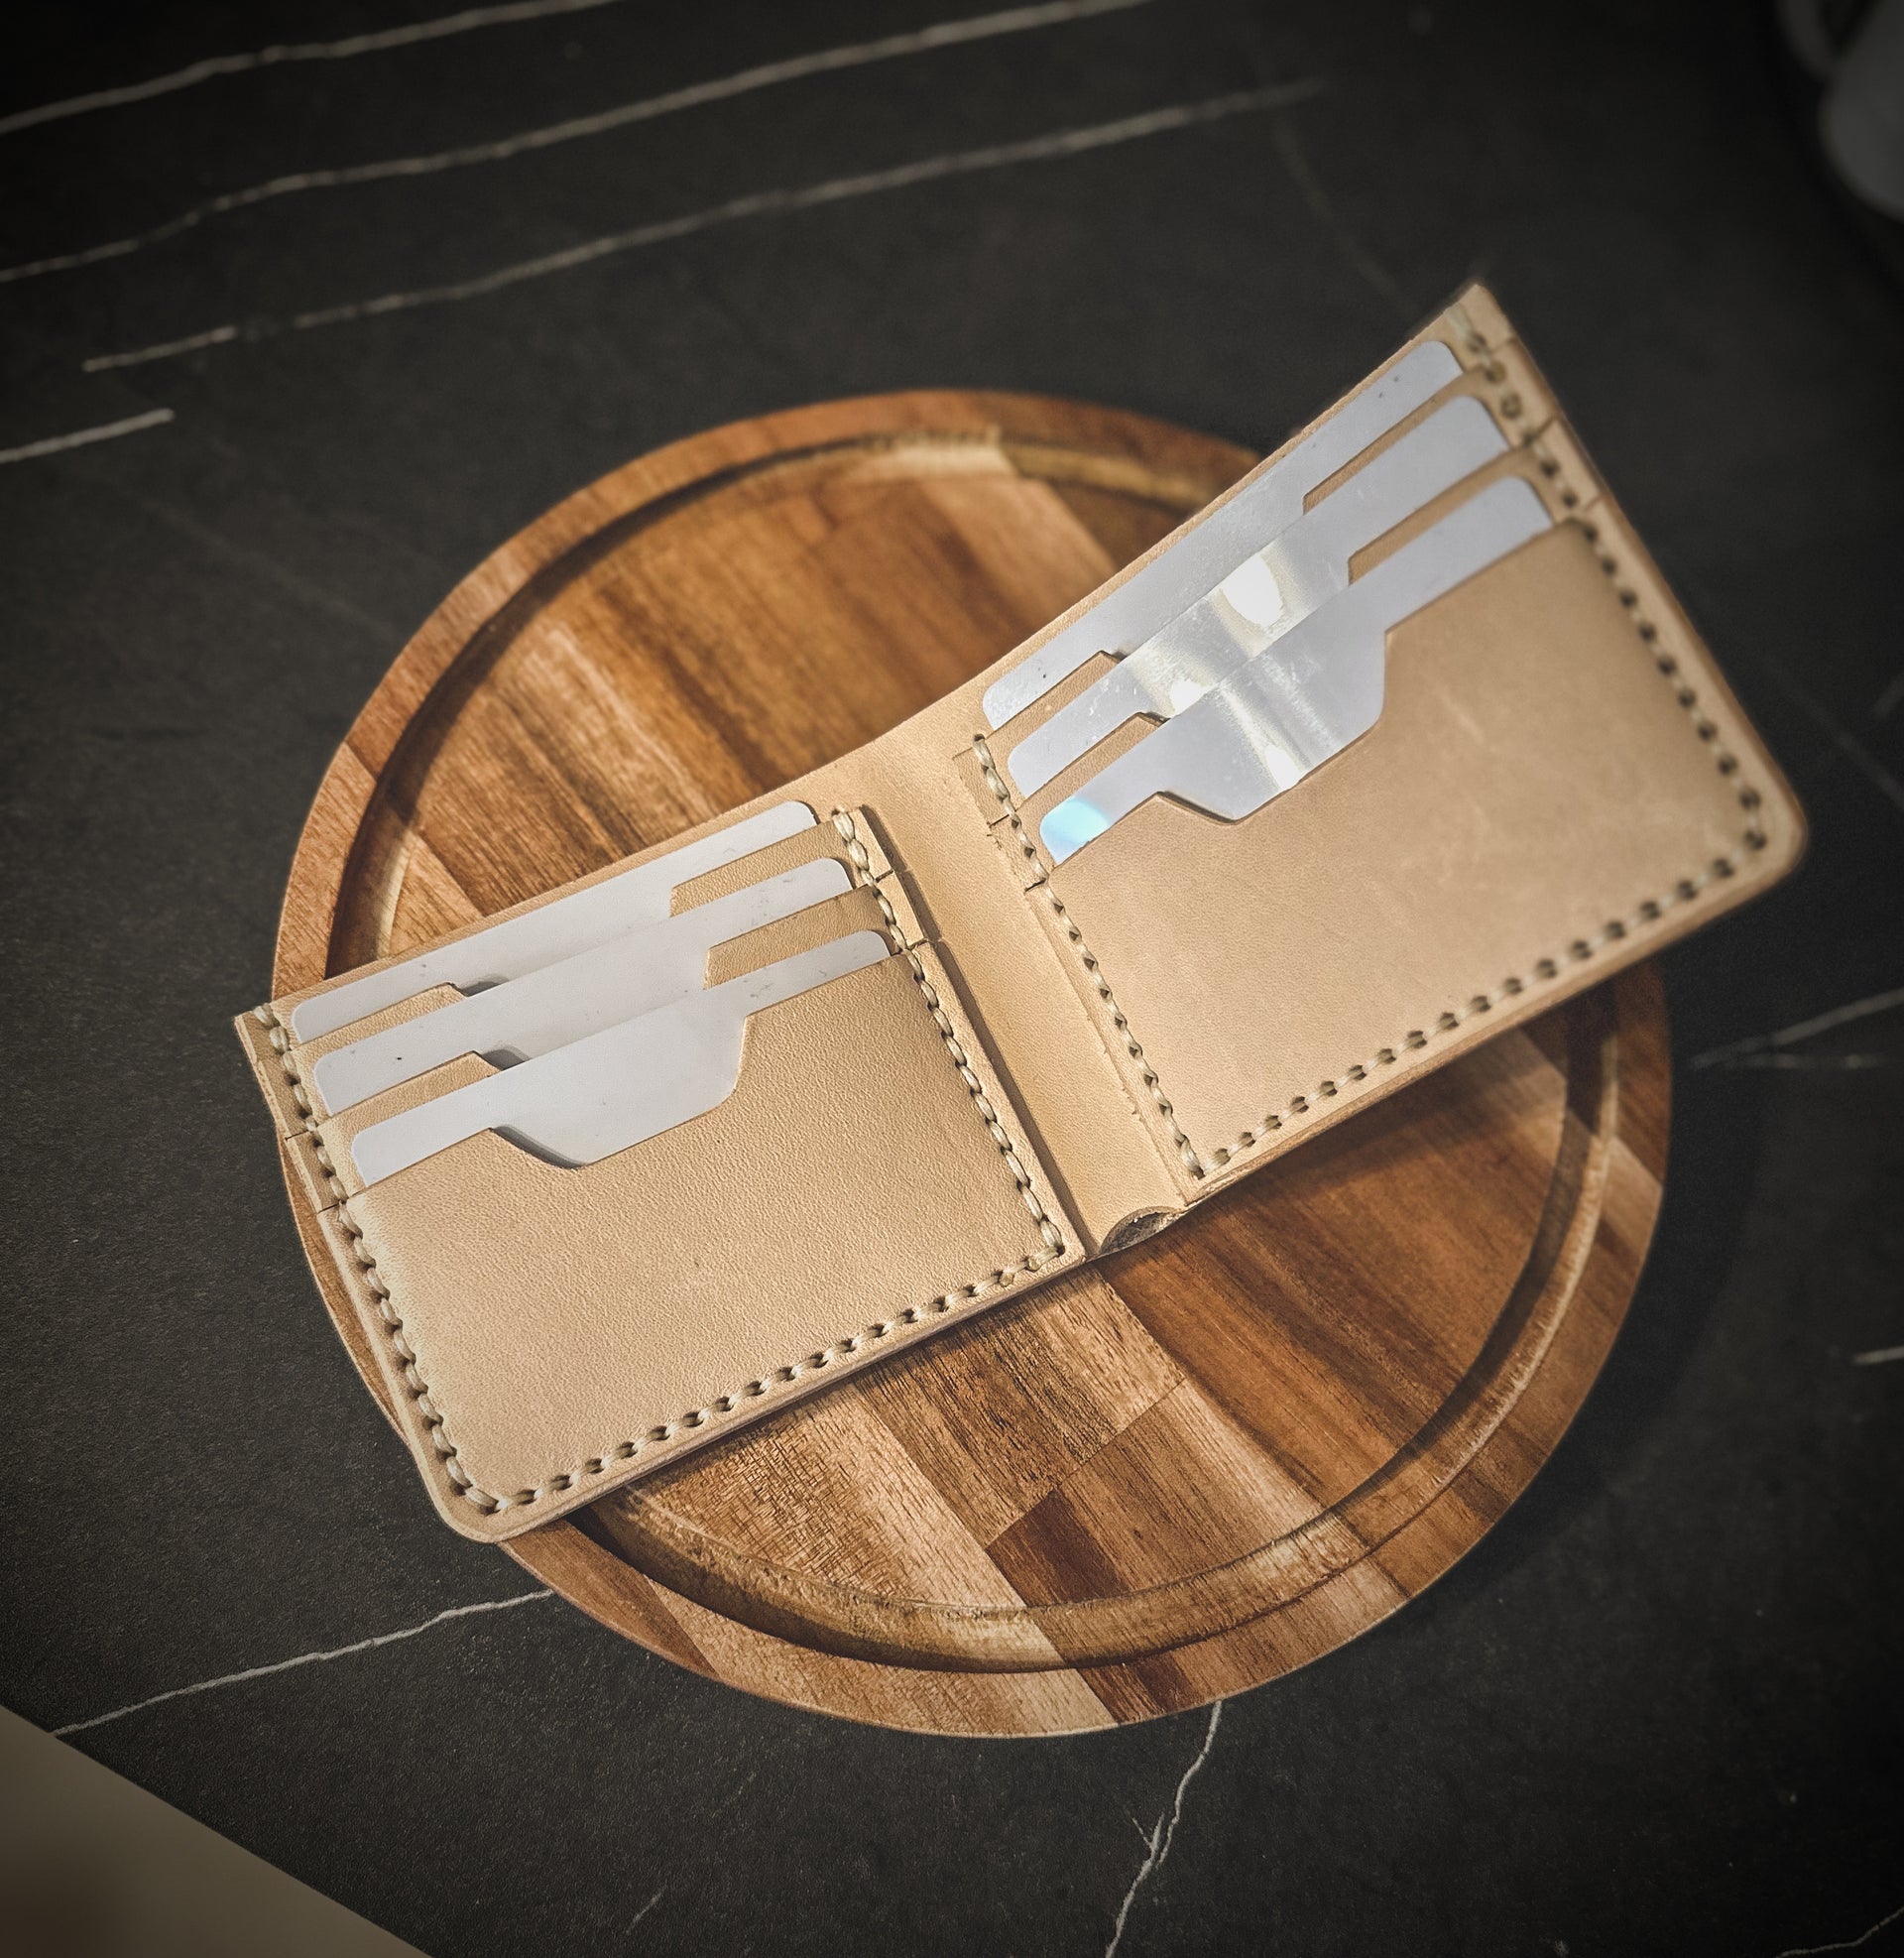 Traditional Bifold Wallet in Horween Natural Dublin